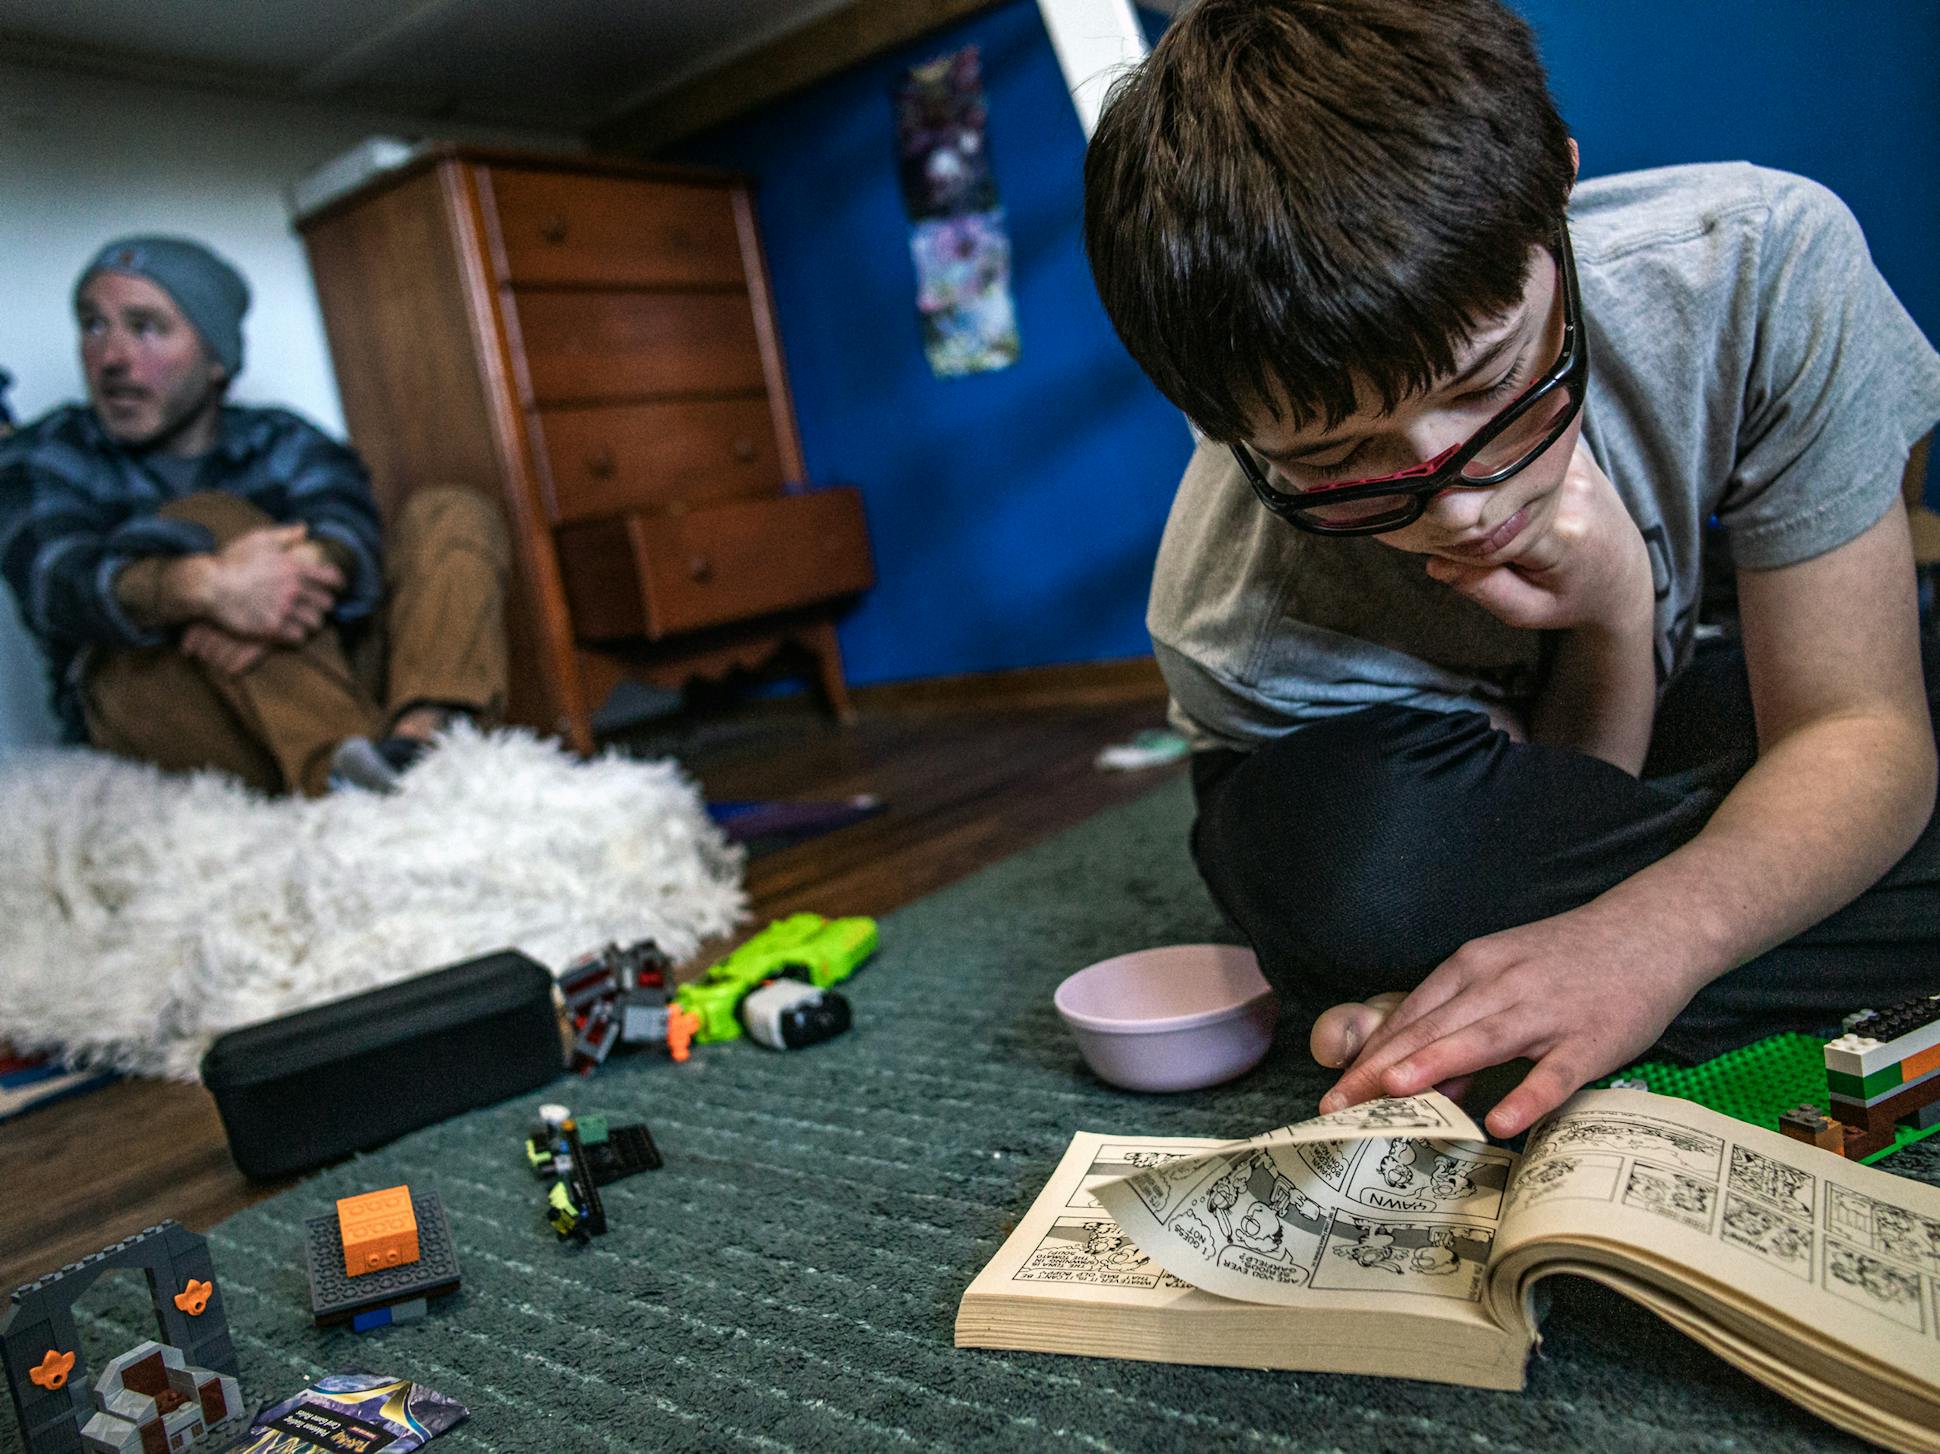 Harrison, 13, hung out with his dad, Chris Bolchen, at home in West St. Paul. Harrison loves Legos, Pokémon and comic strips, which he likes to share to make people laugh.